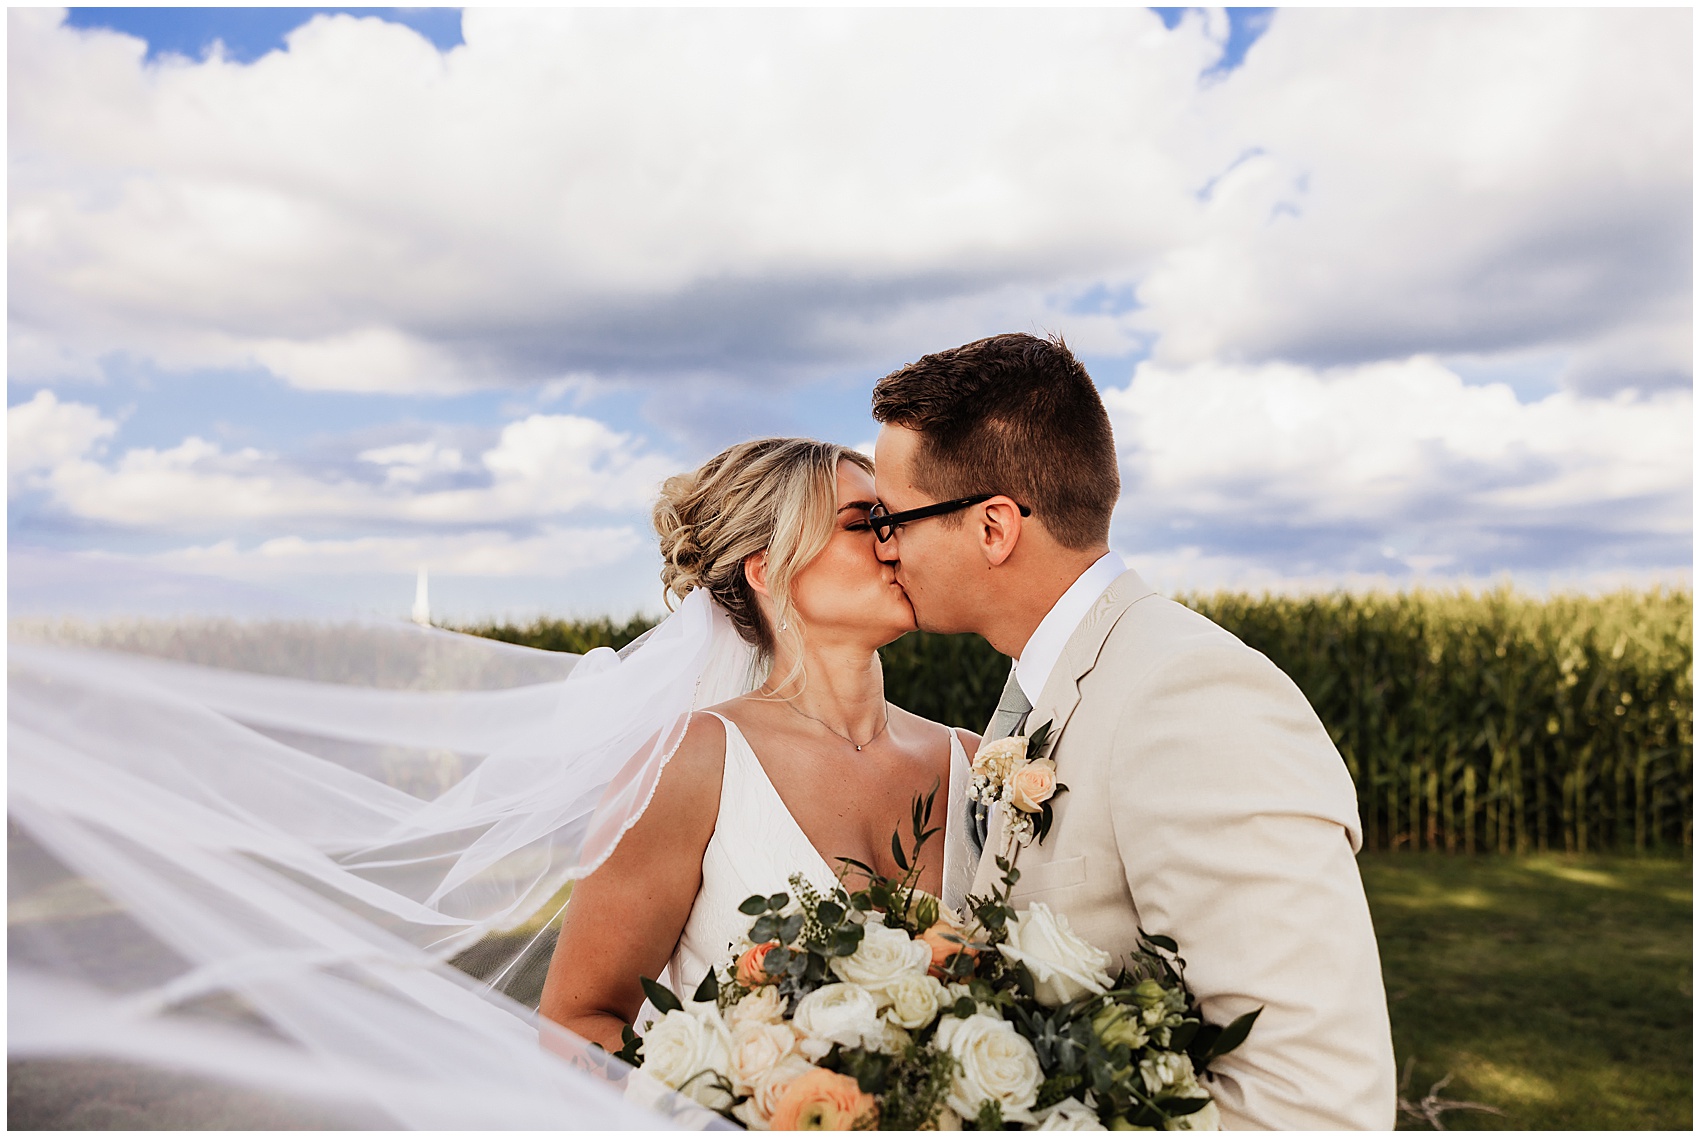 Newlyweds kiss as the veil blows in the wind around them at a sable creek homestead wedding